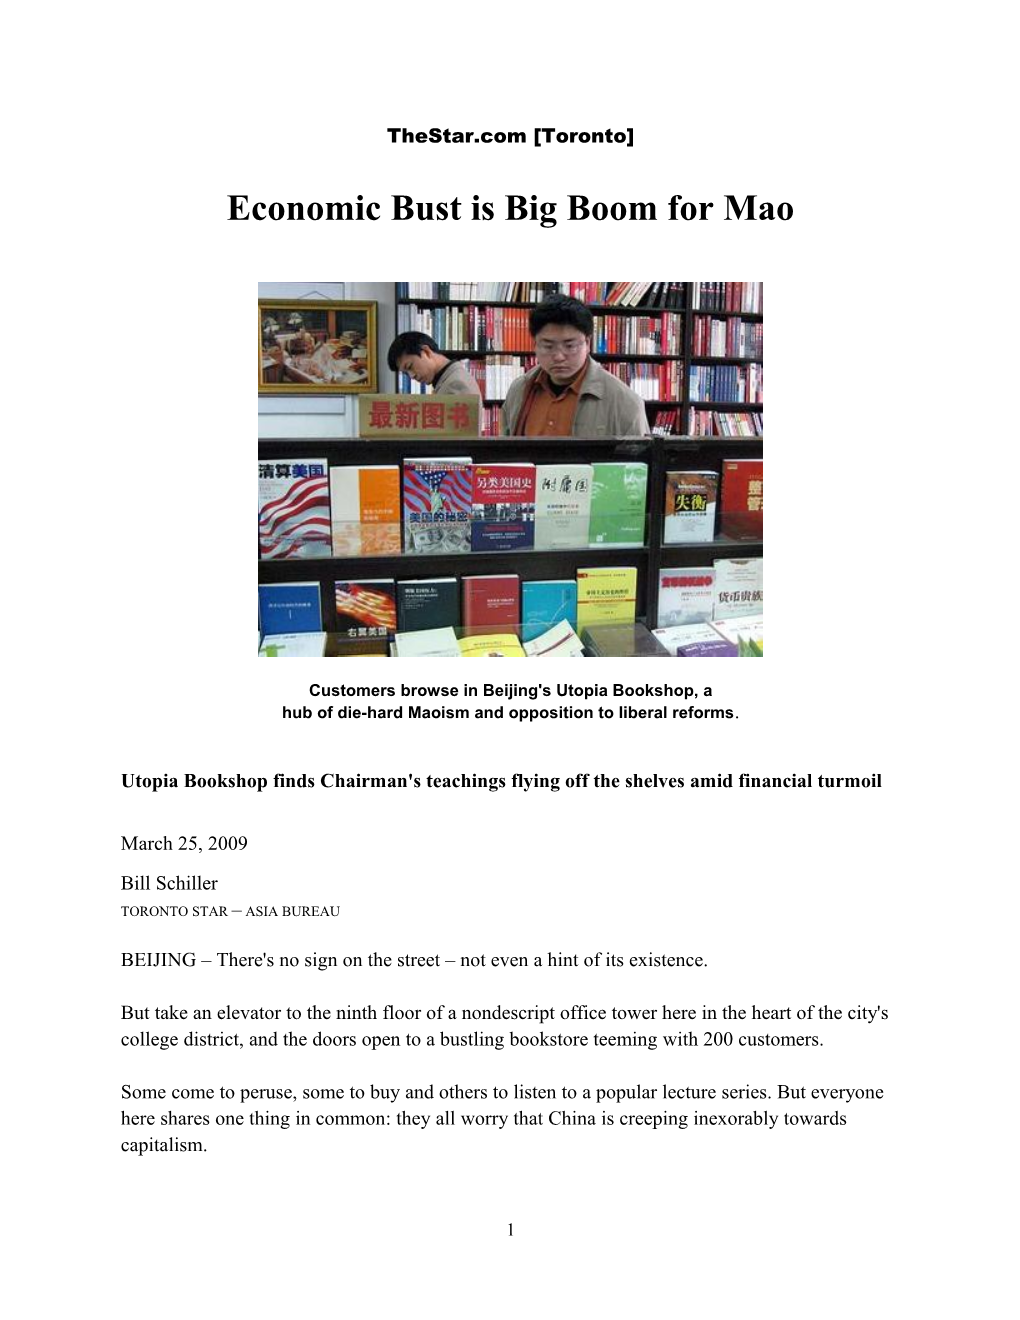 Economic Bust Is Big Boom for Mao